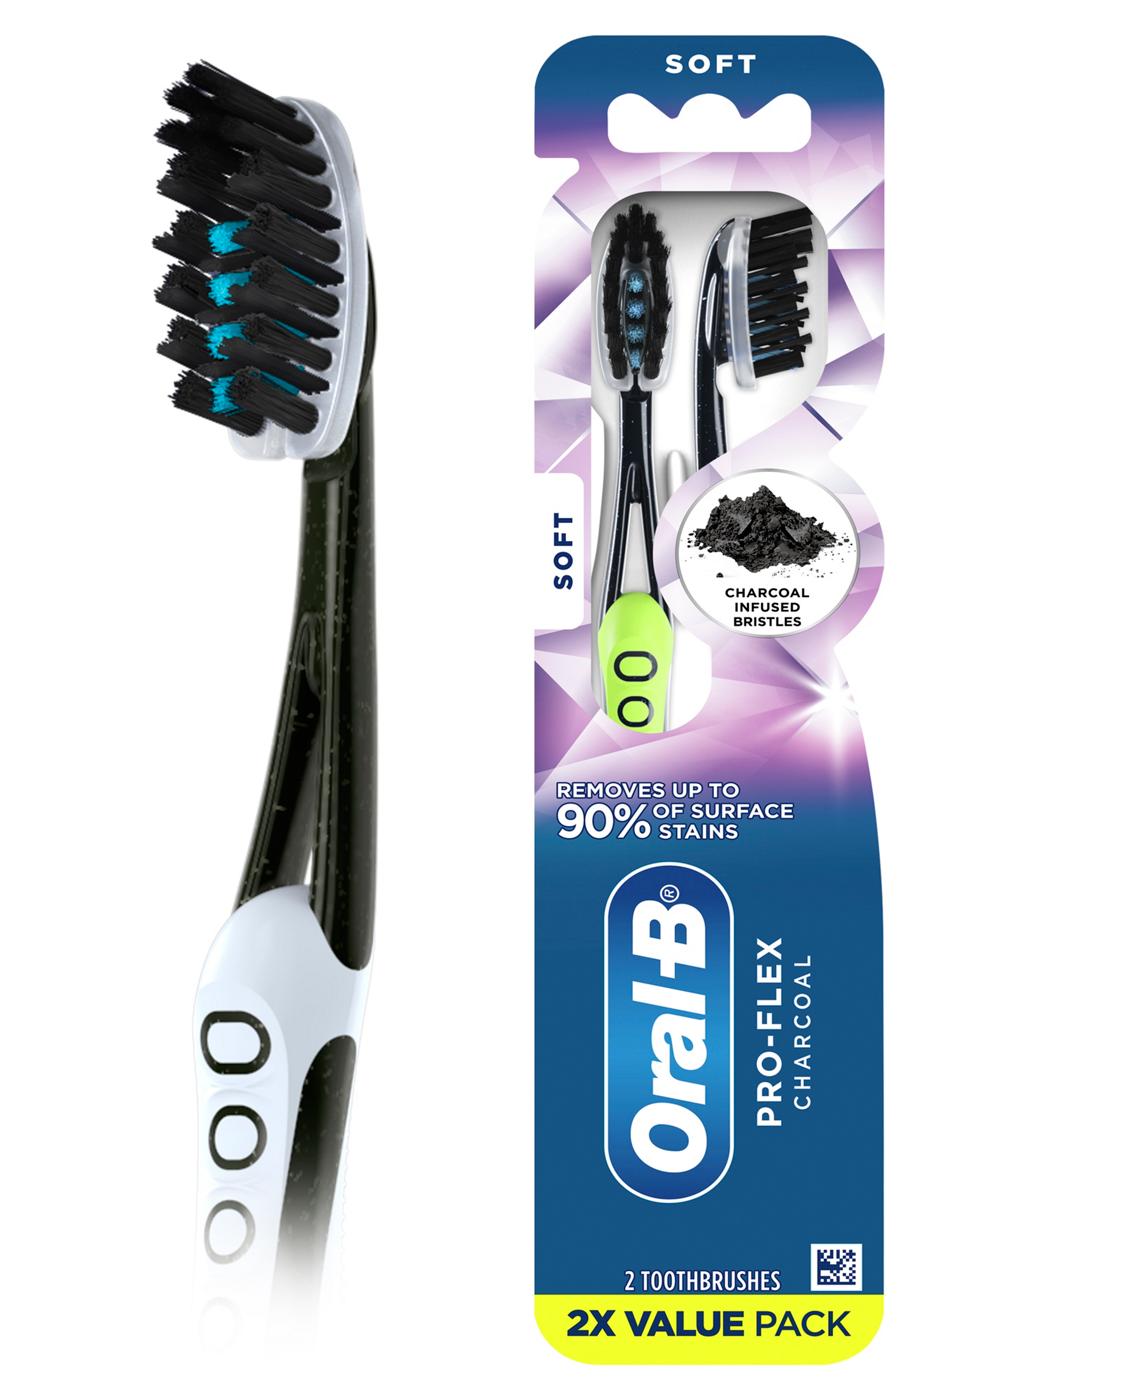 Oral-B Pro-Flex Charcoal Infused Soft Toothbrush; image 5 of 8